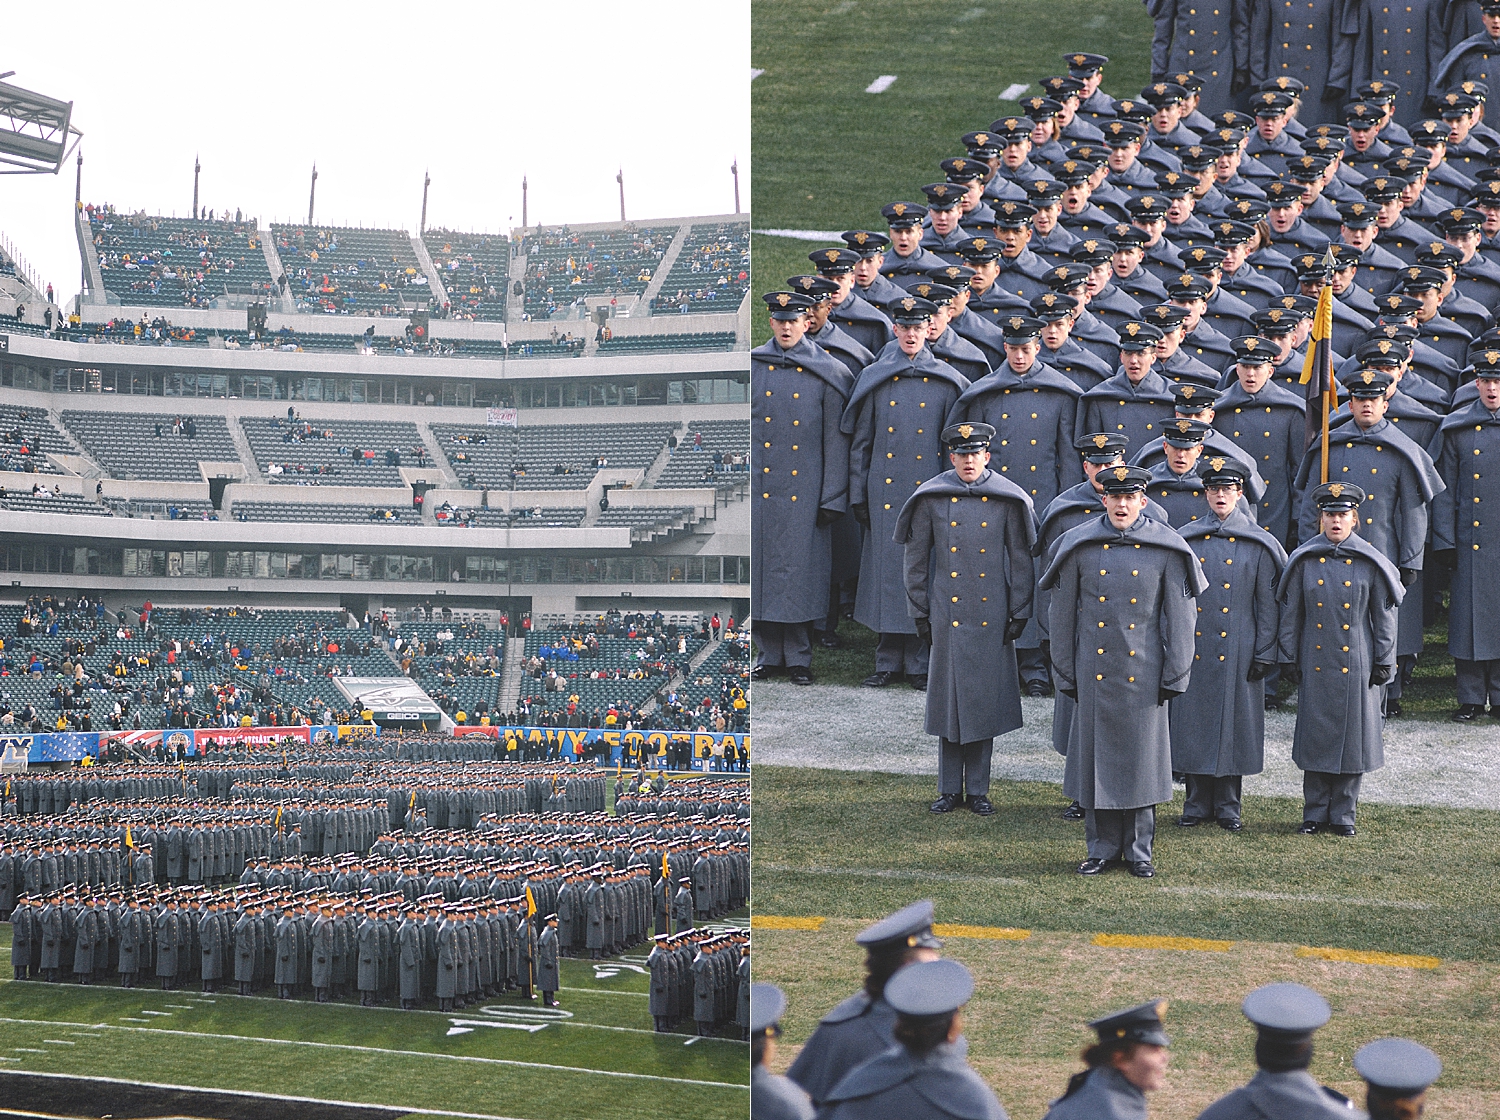 3-cadets-from-west-point-stand-in-formation-at-army-navy-game.jpg